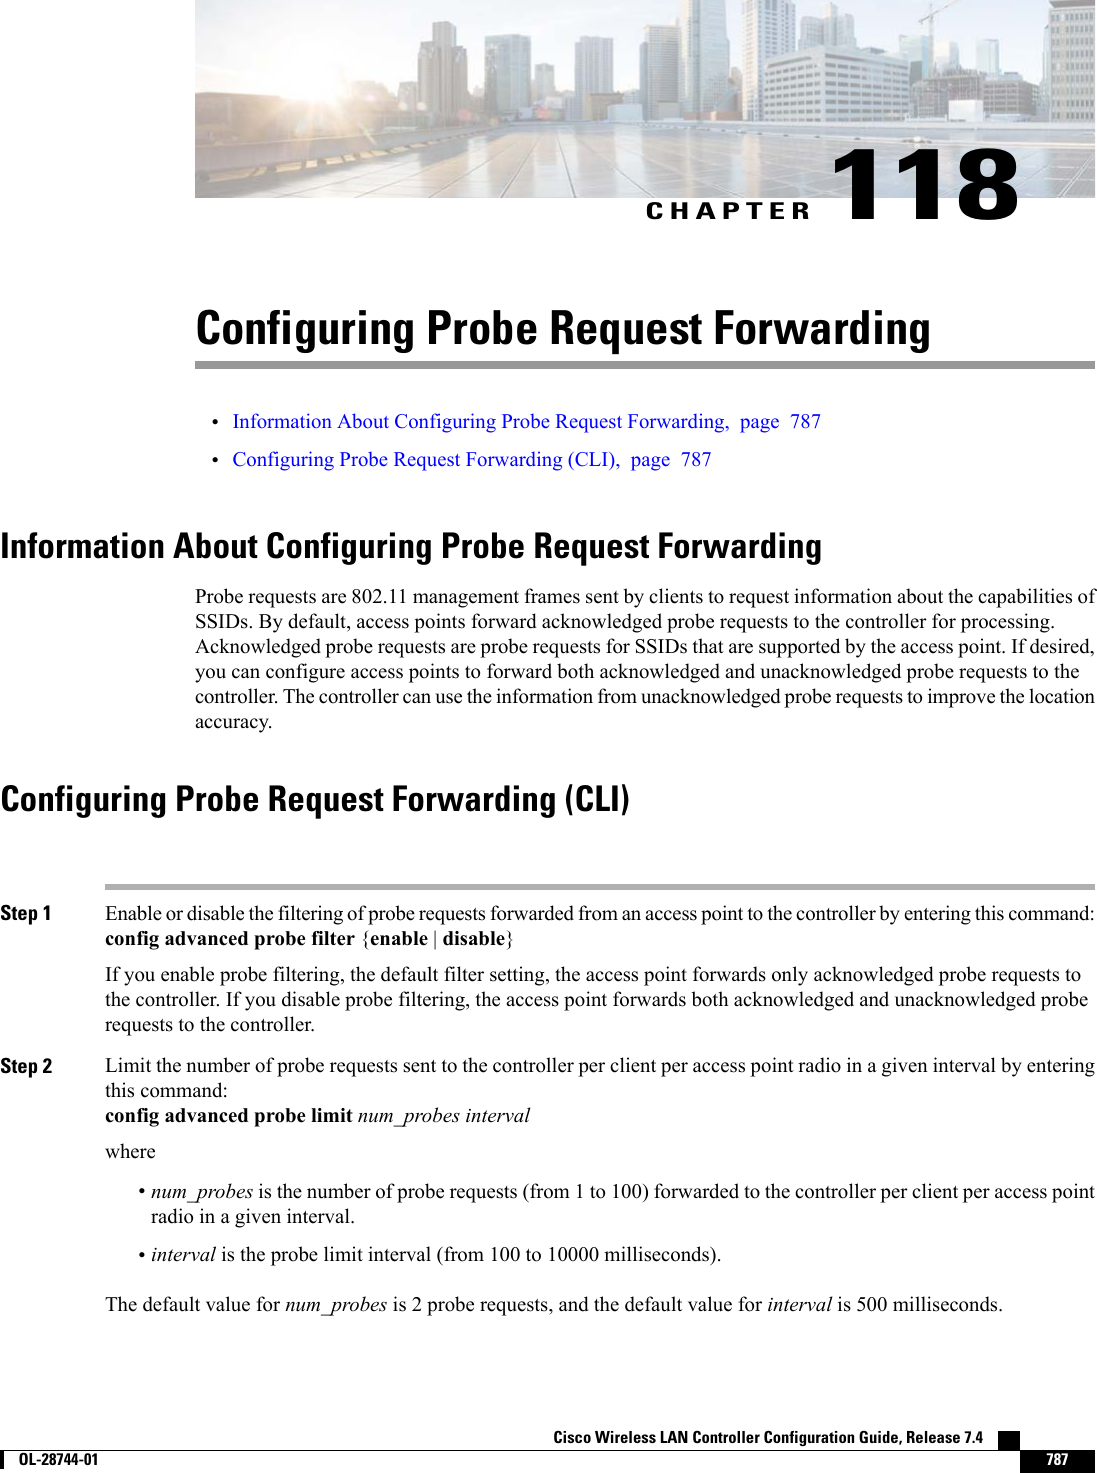 CHAPTER 118Configuring Probe Request Forwarding•Information About Configuring Probe Request Forwarding, page 787•Configuring Probe Request Forwarding (CLI), page 787Information About Configuring Probe Request ForwardingProbe requests are 802.11 management frames sent by clients to request information about the capabilities ofSSIDs. By default, access points forward acknowledged probe requests to the controller for processing.Acknowledged probe requests are probe requests for SSIDs that are supported by the access point. If desired,you can configure access points to forward both acknowledged and unacknowledged probe requests to thecontroller. The controller can use the information from unacknowledged probe requests to improve the locationaccuracy.Configuring Probe Request Forwarding (CLI)Step 1 Enable or disable the filtering of probe requests forwarded from an access point to the controller by entering this command:config advanced probe filter {enable |disable}If you enable probe filtering, the default filter setting, the access point forwards only acknowledged probe requests tothe controller. If you disable probe filtering, the access point forwards both acknowledged and unacknowledged proberequests to the controller.Step 2 Limit the number of probe requests sent to the controller per client per access point radio in a given interval by enteringthis command:config advanced probe limit num_probes intervalwhere•num_probes is the number of probe requests (from 1 to 100) forwarded to the controller per client per access pointradio in a given interval.•interval is the probe limit interval (from 100 to 10000 milliseconds).The default value for num_probes is 2 probe requests, and the default value for interval is 500 milliseconds.Cisco Wireless LAN Controller Configuration Guide, Release 7.4        OL-28744-01 787